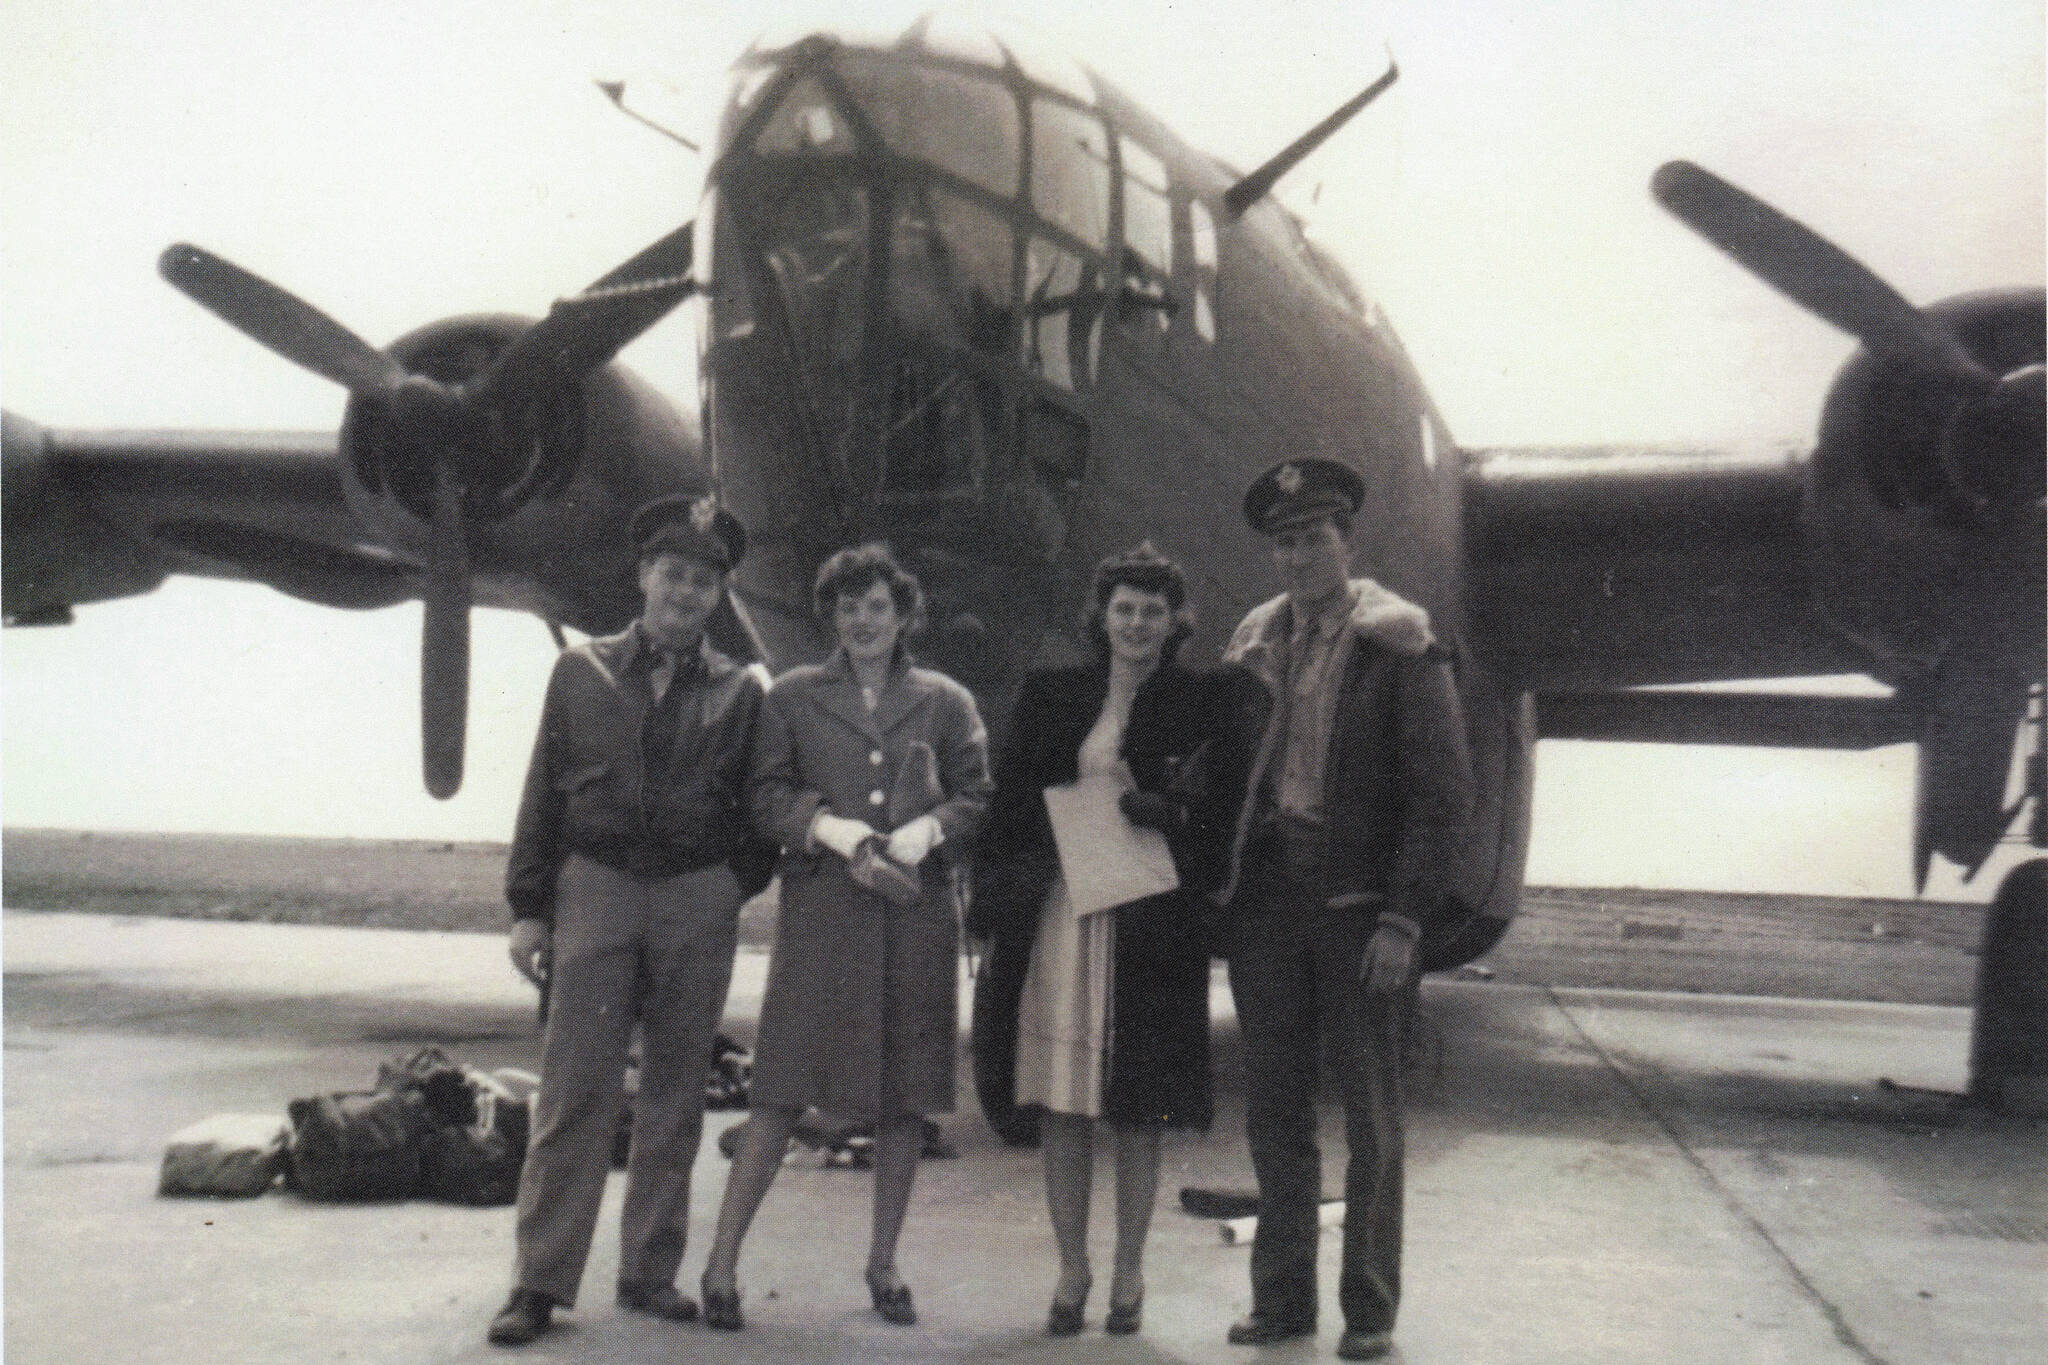 [   2a—] Larry and Rusty Lancashire (at left) pose in front of a B-24 bomber in the early 1940s with another unidentified couple. Larry was a B-24 co-pilot during World War II. (Photo courtesy of the Lancashire Family Collection)